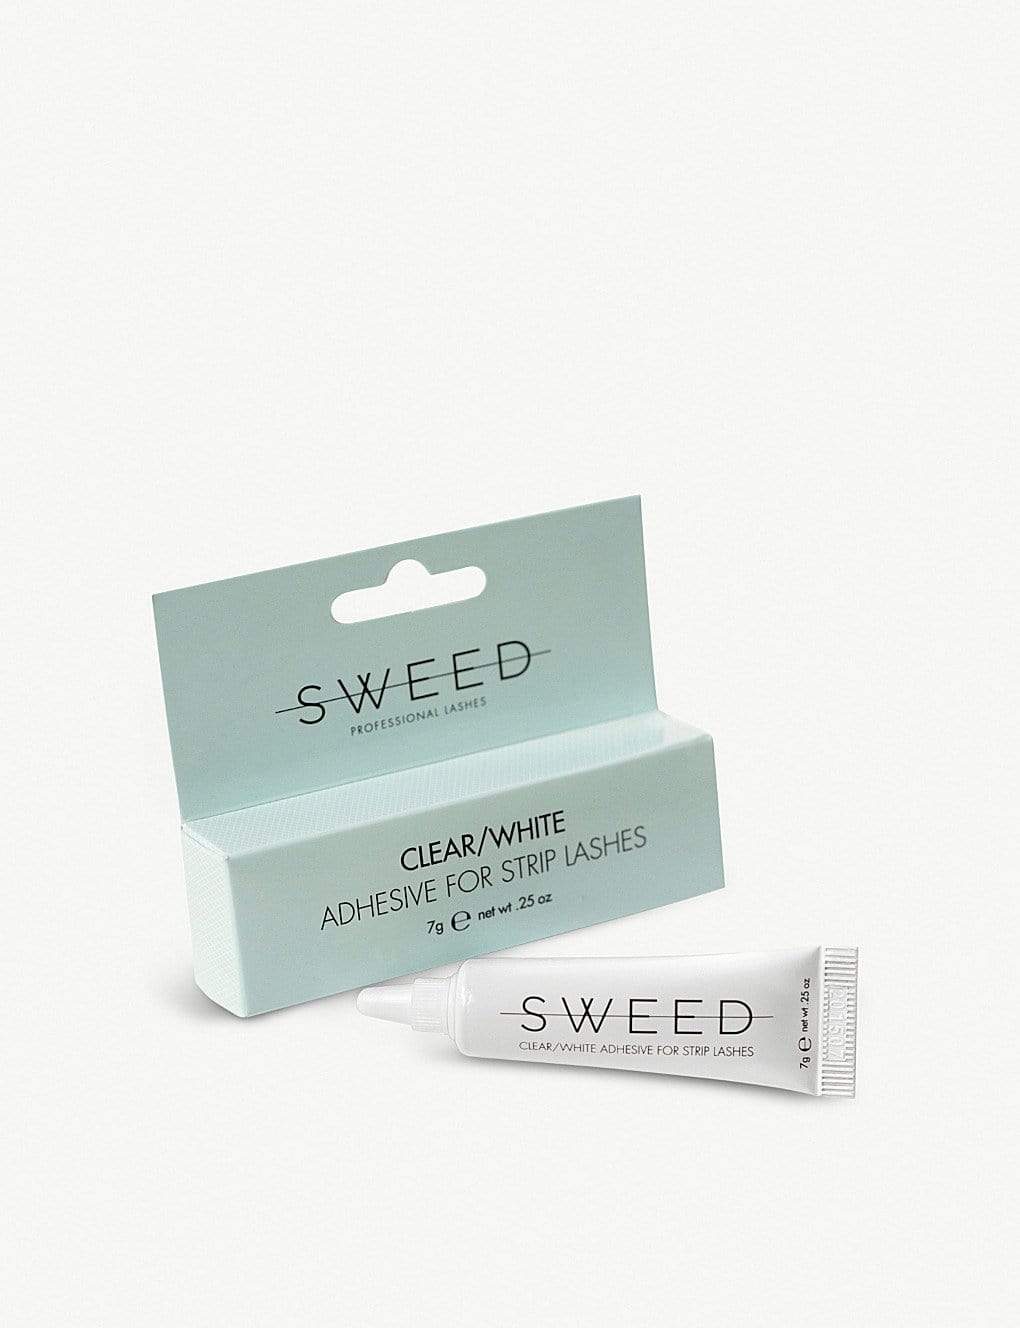 SWEED LASHES Adhesive For Strip Lashes, lashes, London Loves Beauty